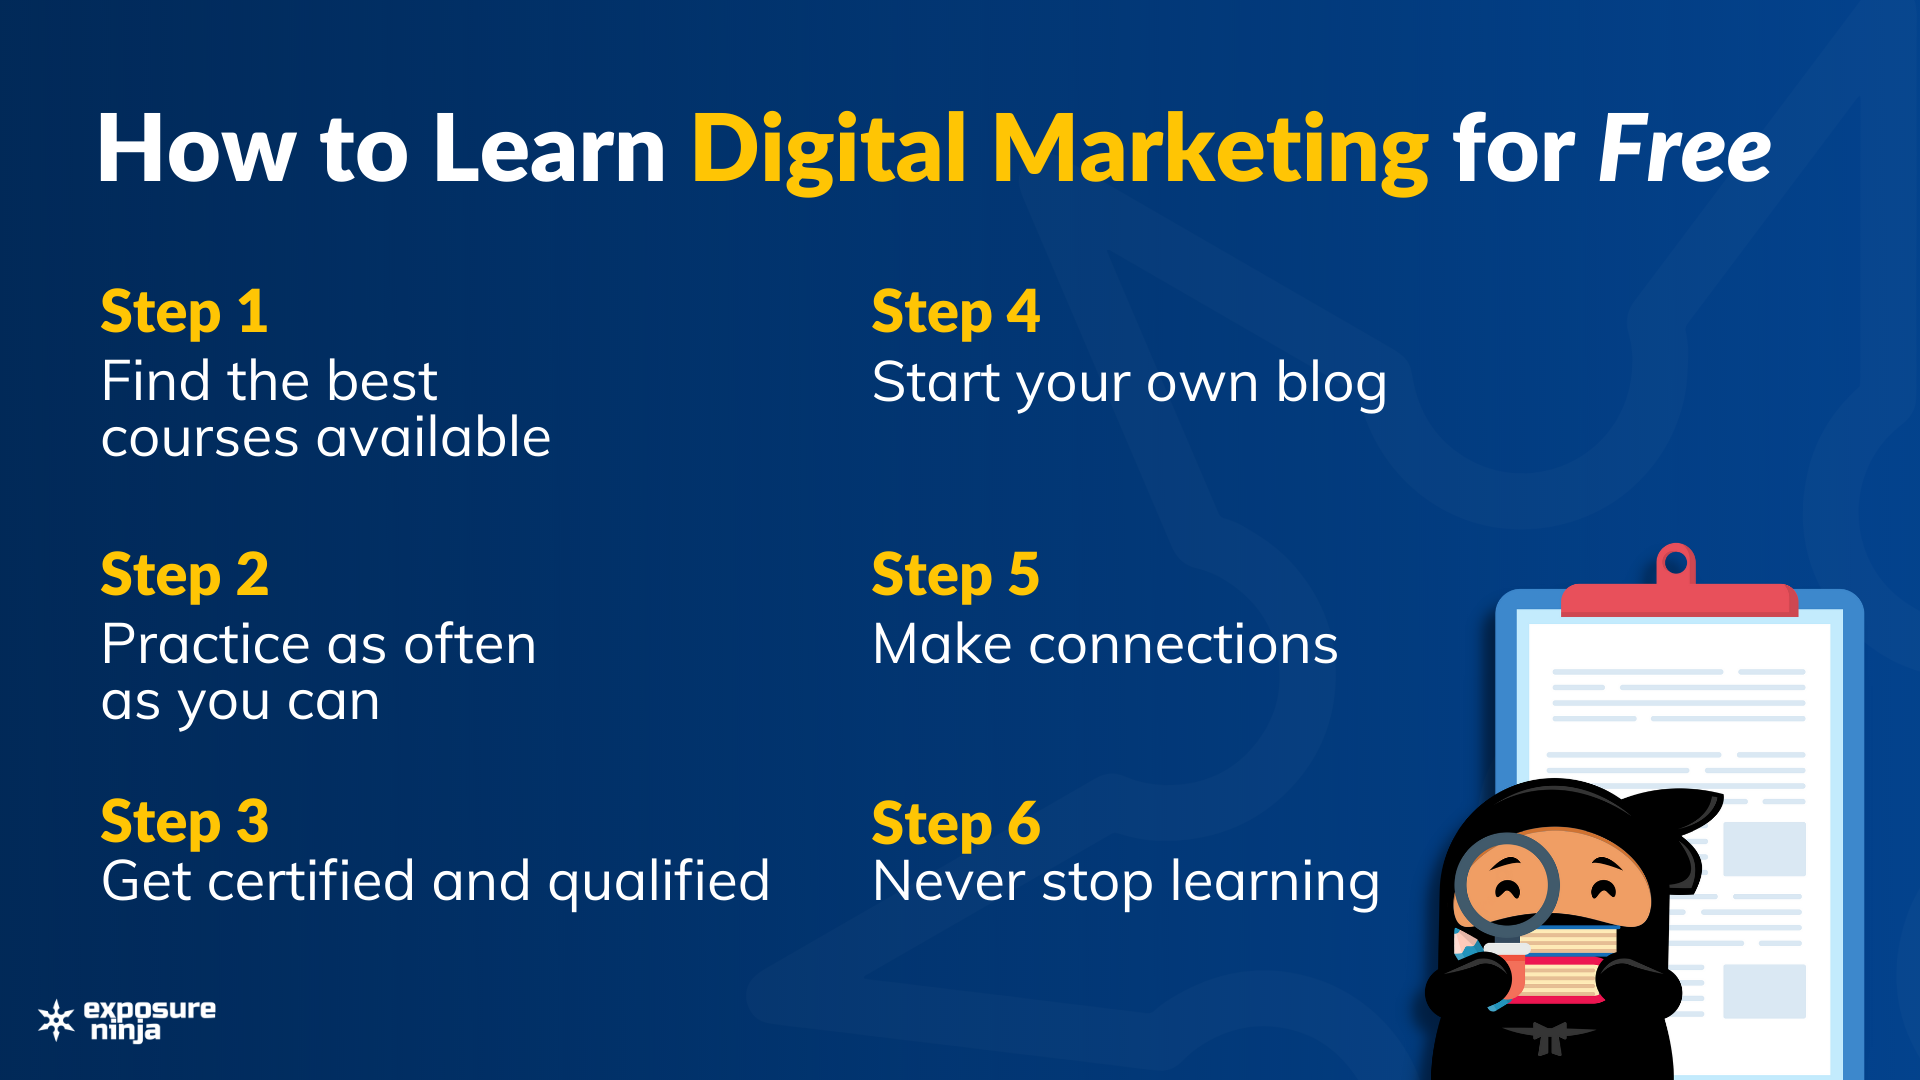 Best Place to Learn Digital Marketing for Free